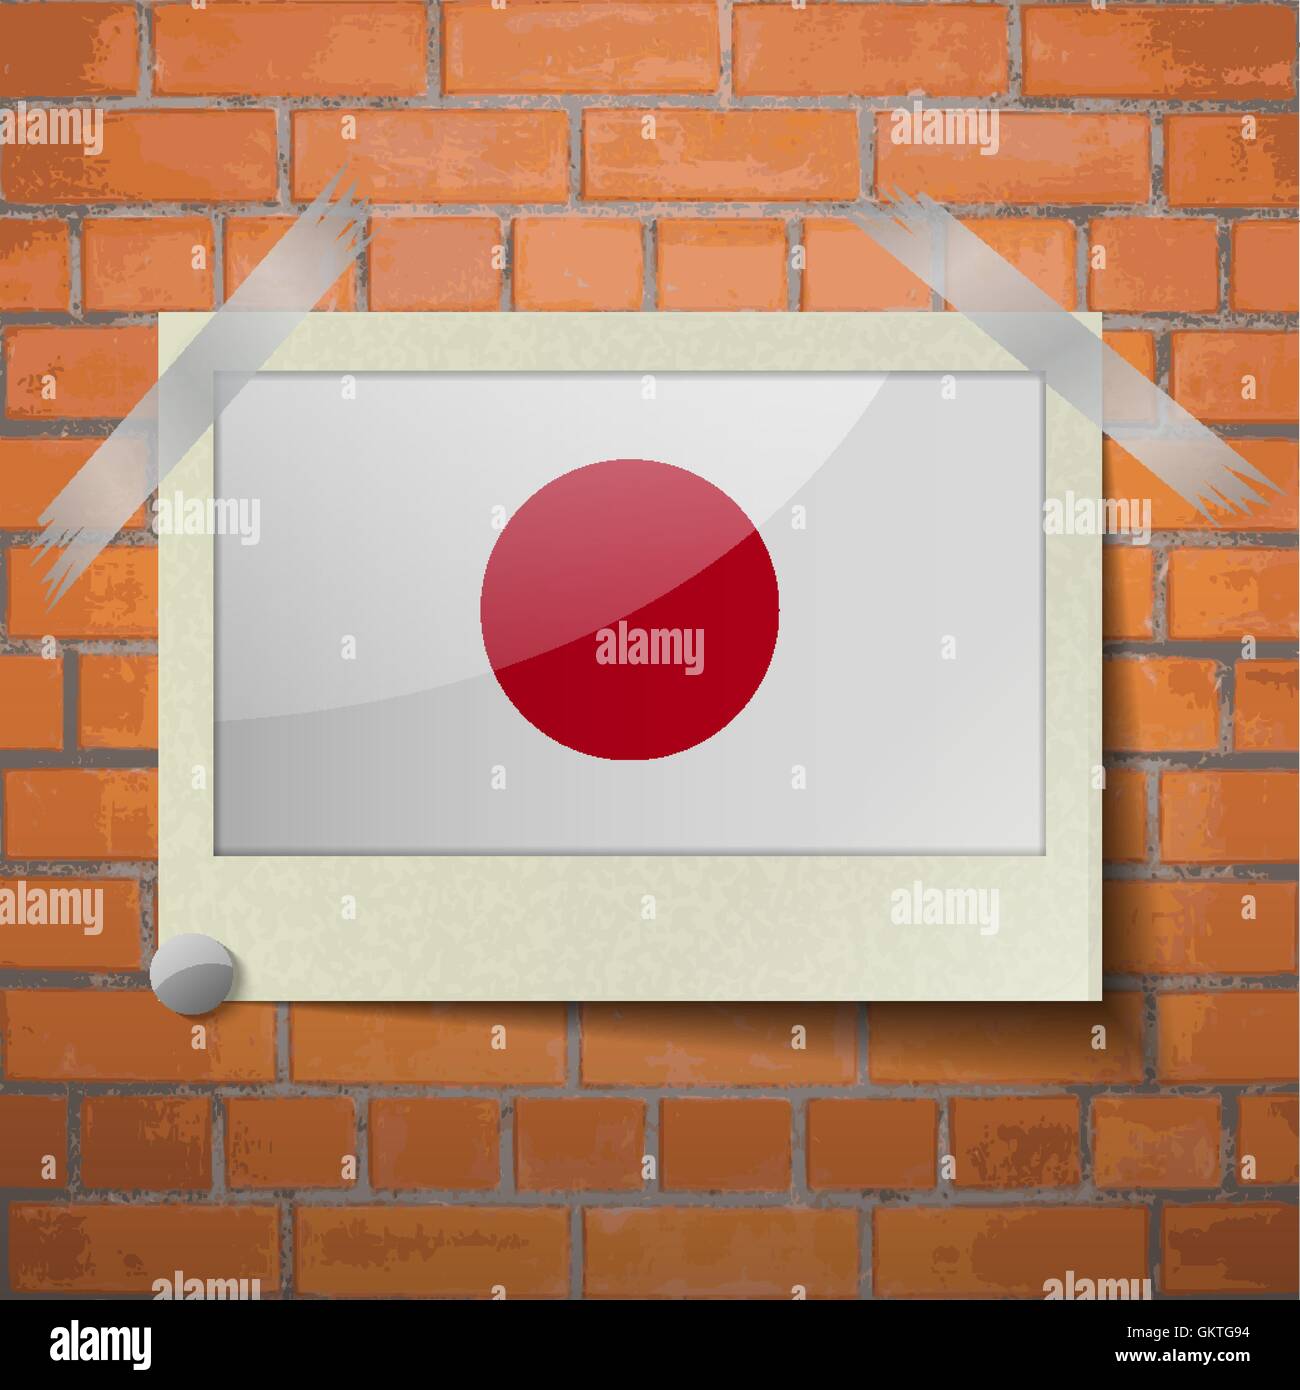 Flags Japan scotch taped to a red brick wall Stock Vector